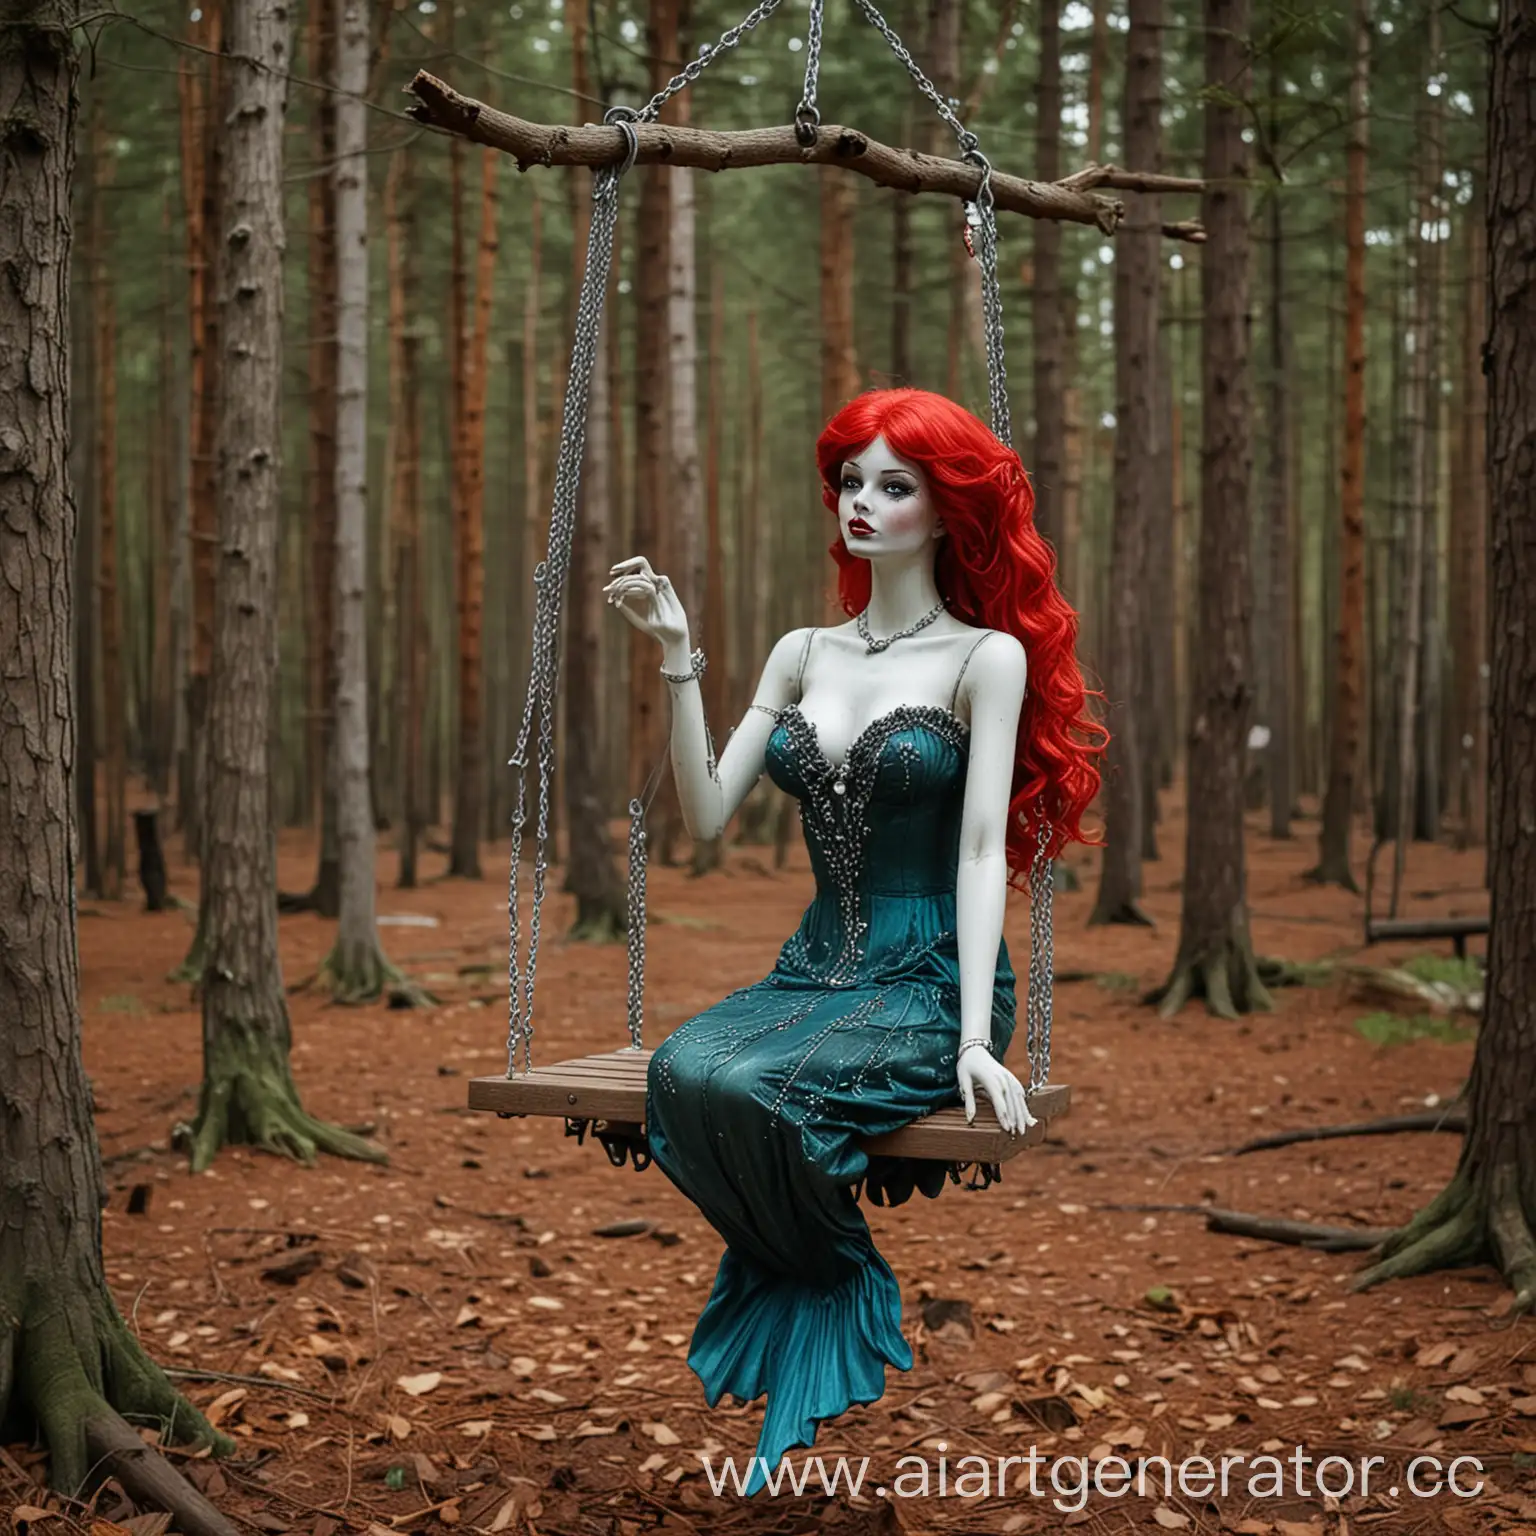 Eerie-RedWigged-Mannequin-Mermaid-on-Swing-in-Forest